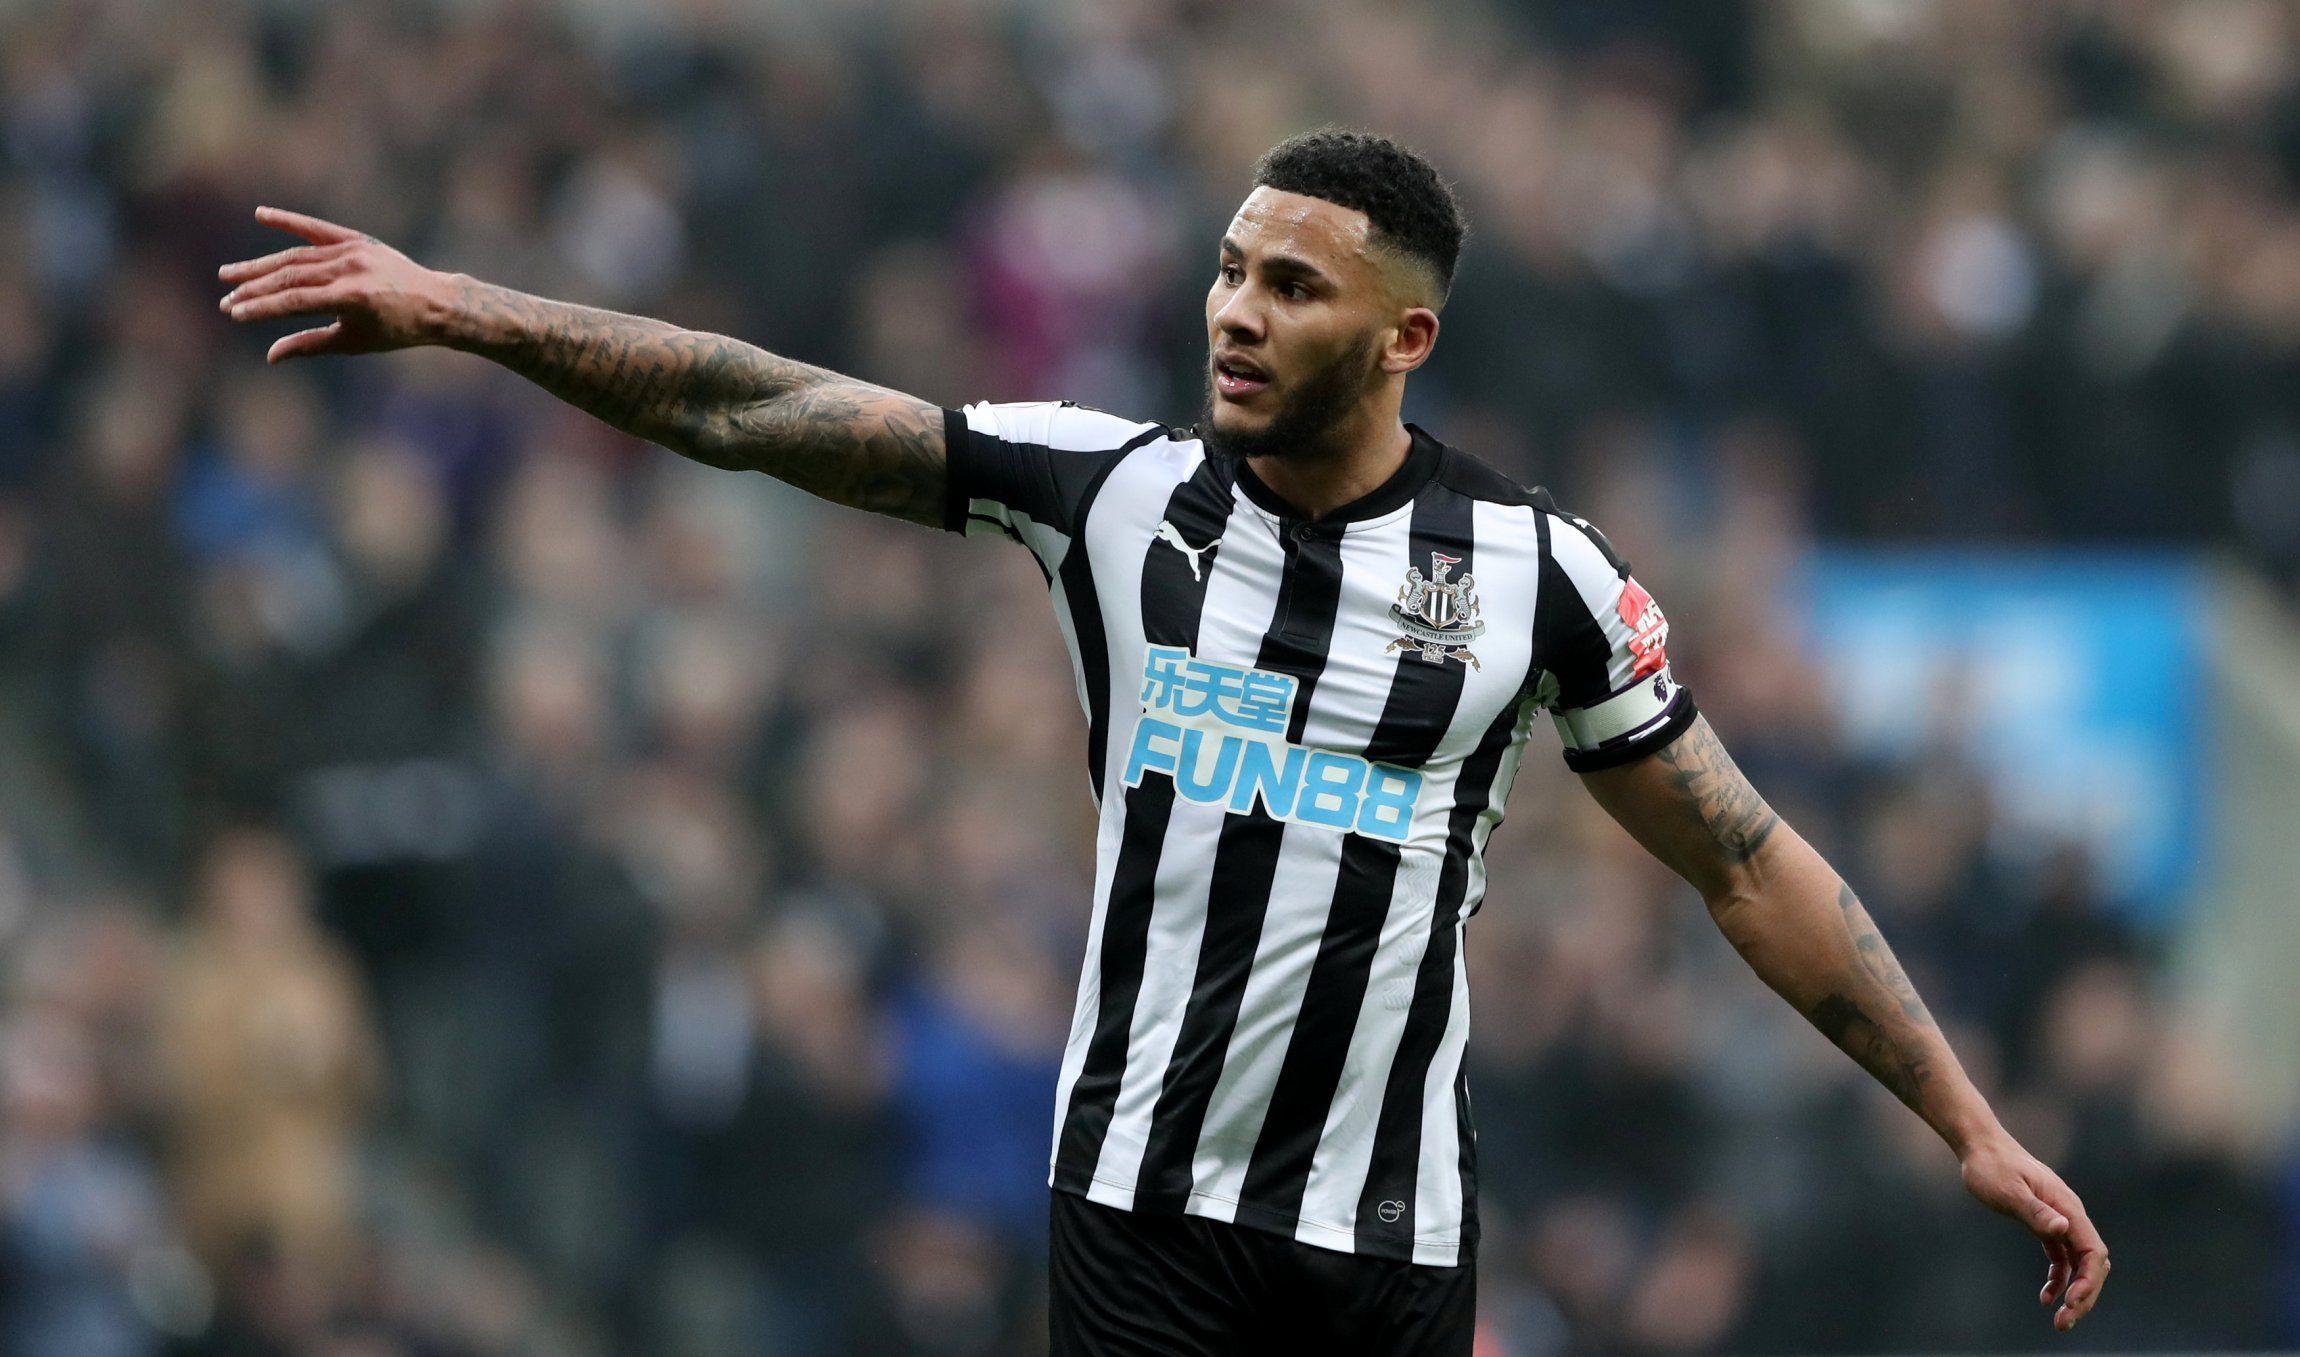 Jamaal Lascelles in action for Newcastle United